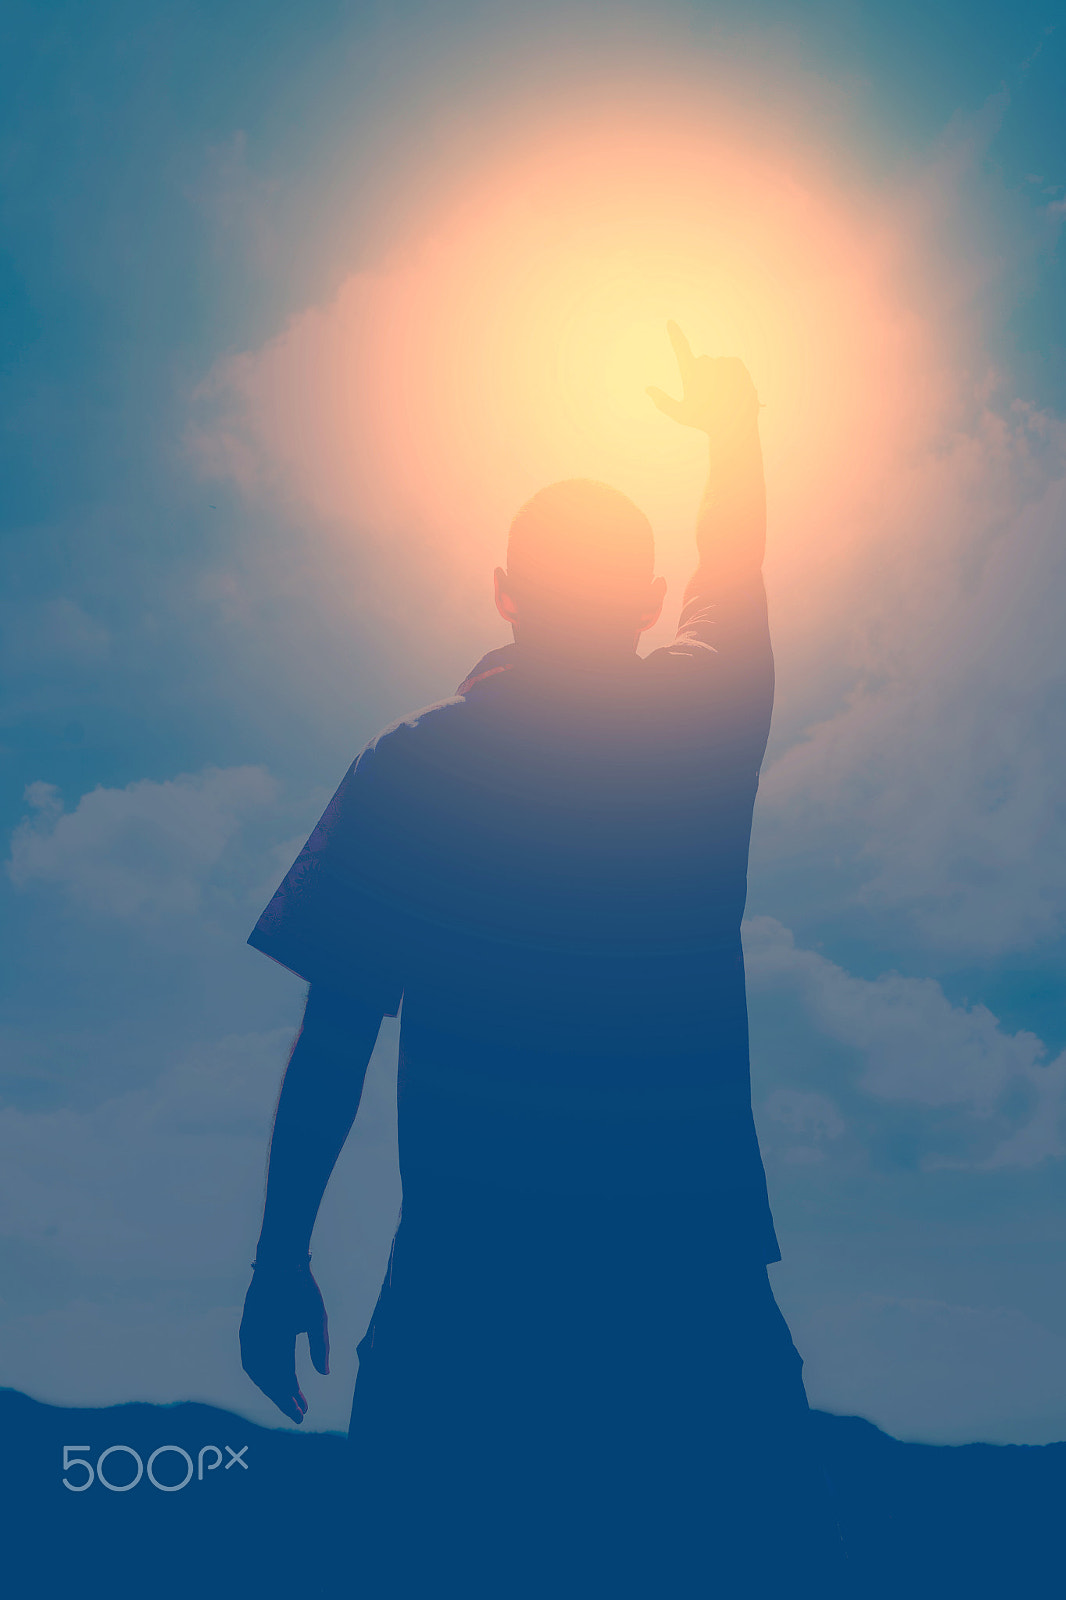 Canon EOS 70D + Sigma 17-70mm F2.8-4 DC Macro OS HSM | C sample photo. Silhouette young man raising hand into the sun photography